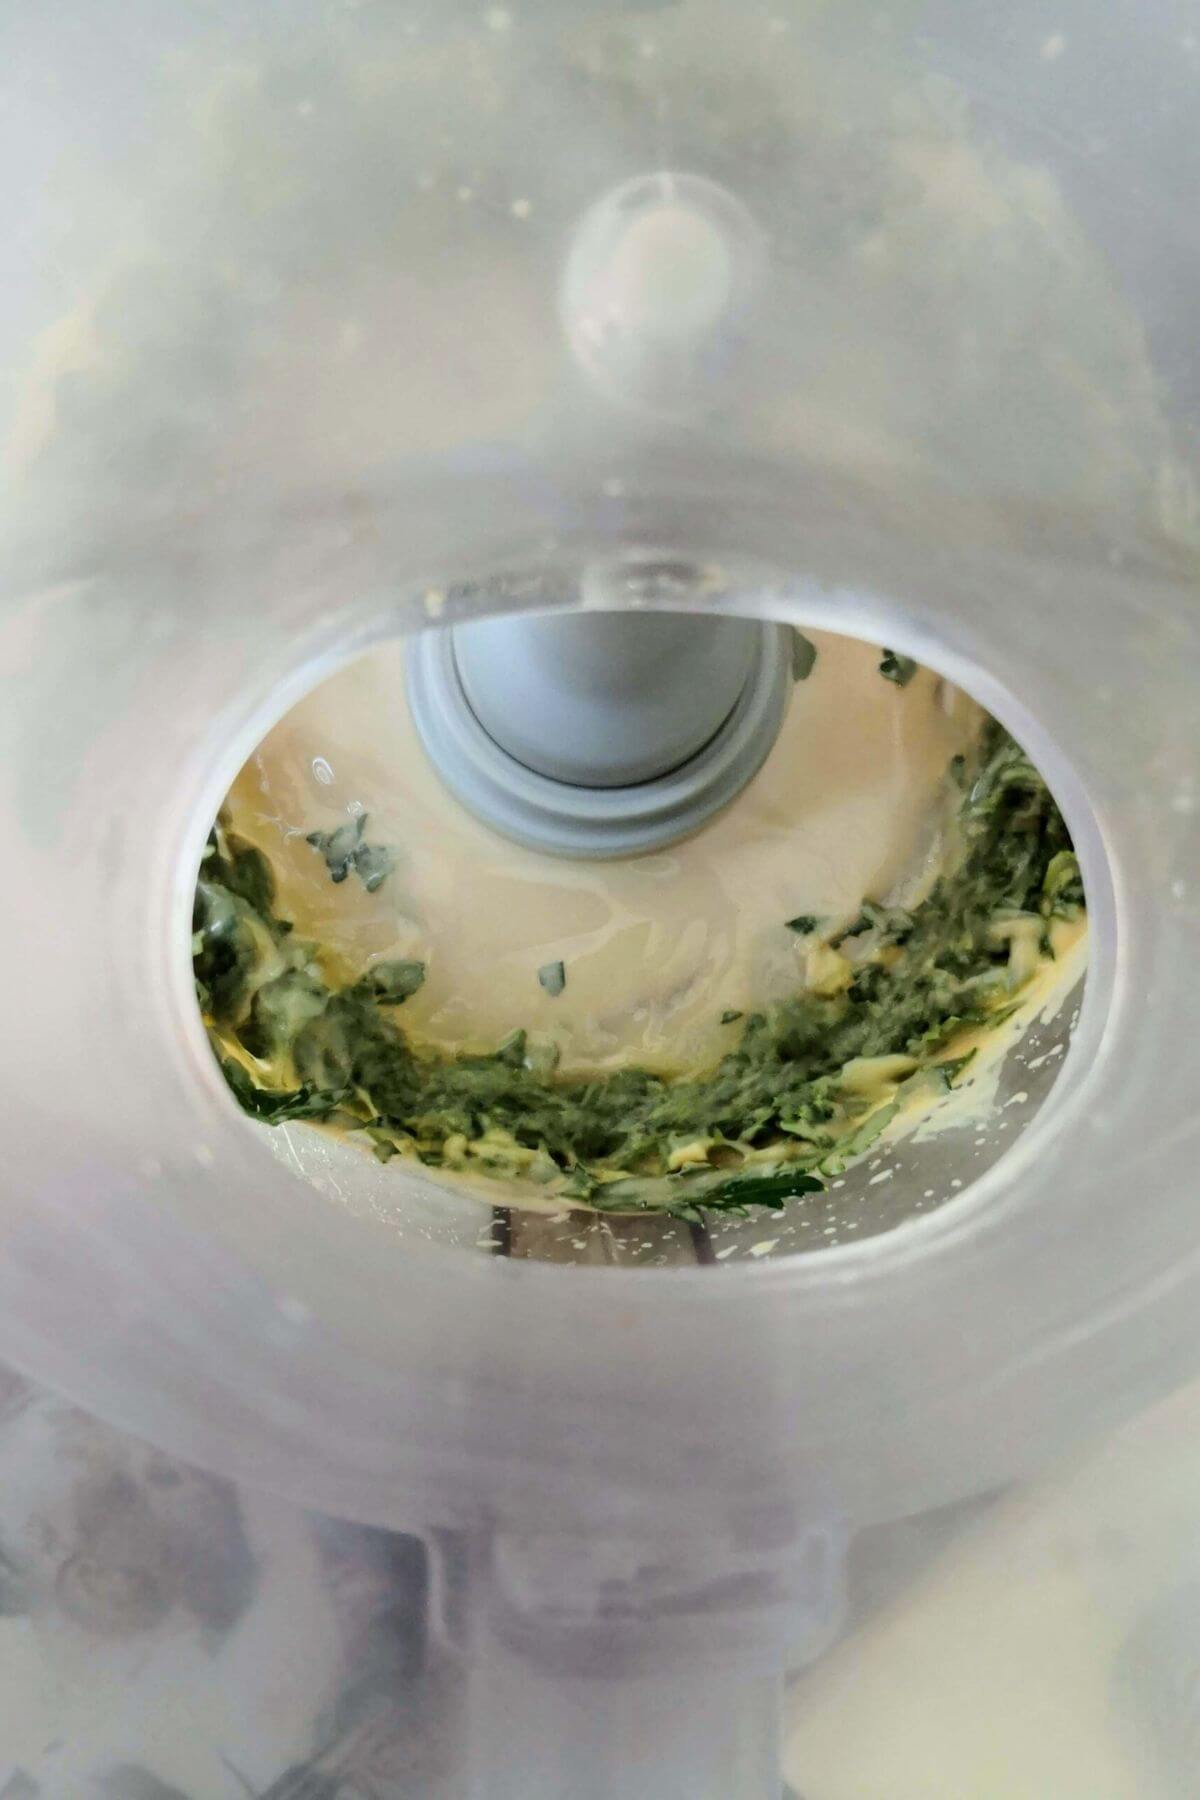 Green tahini being blitzed in the bowl of a food processor.